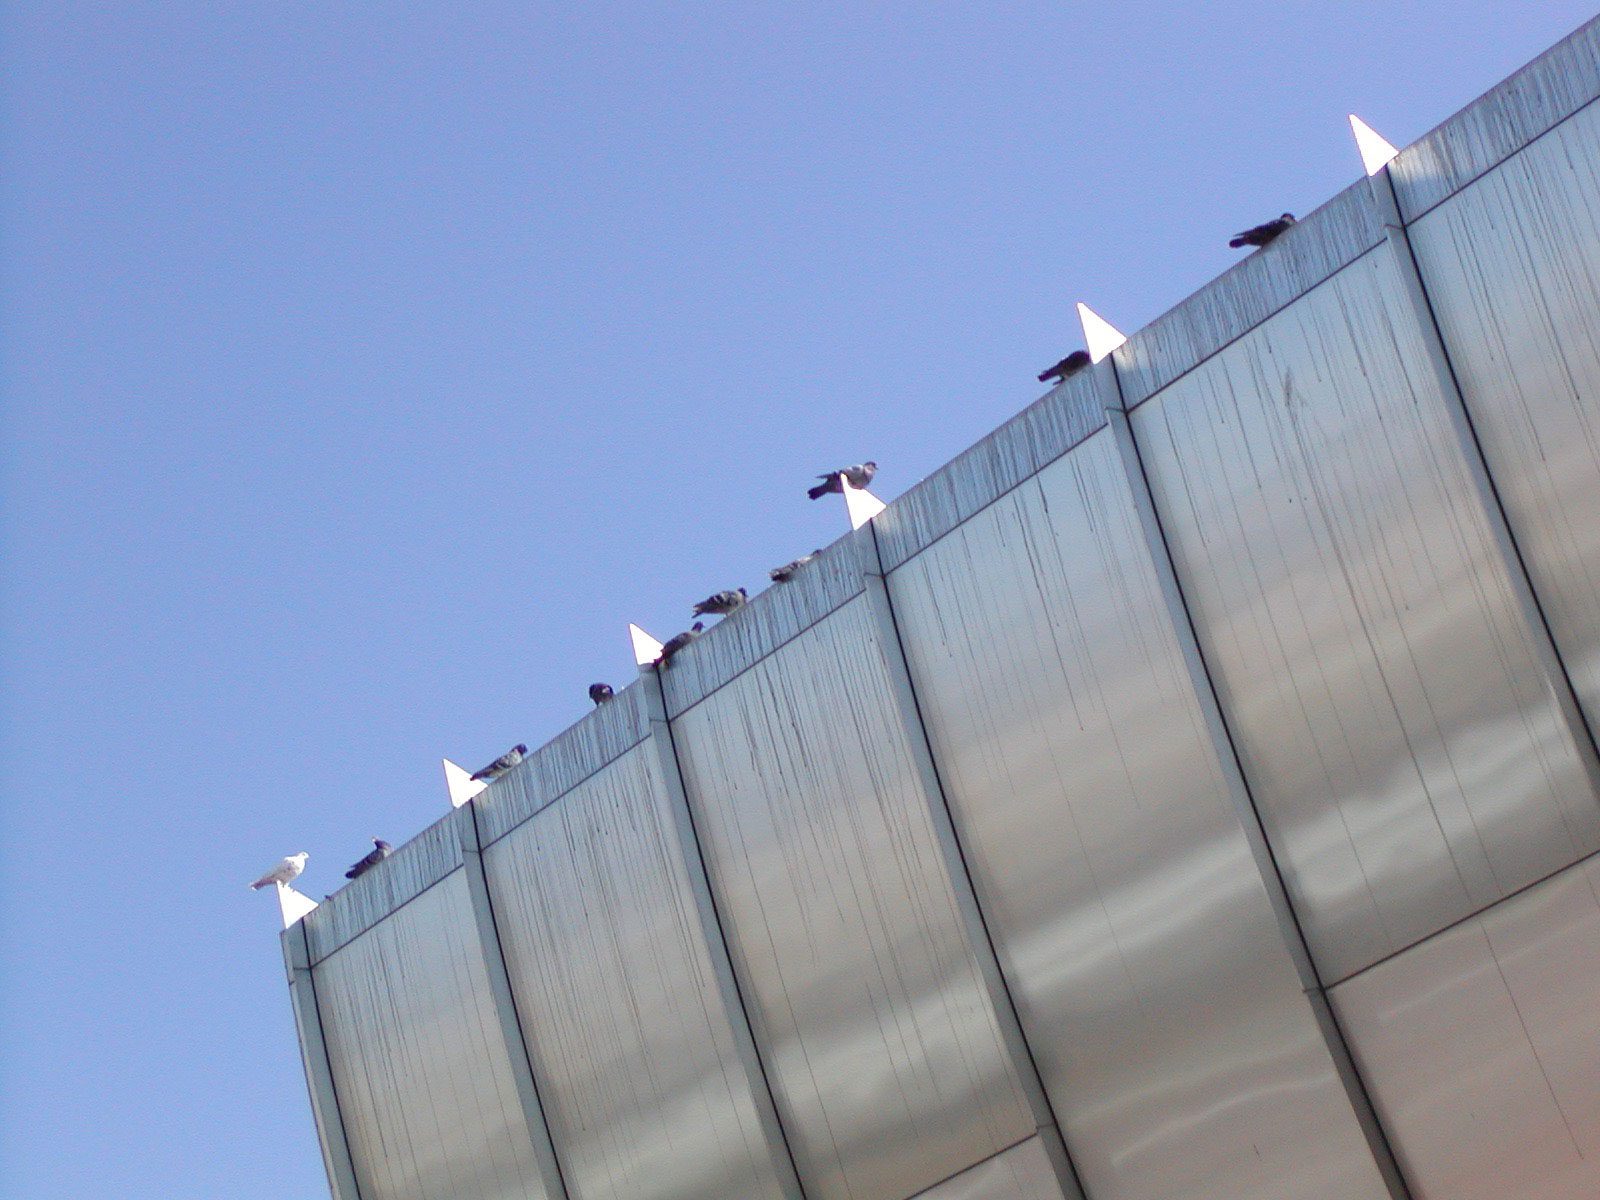 Pigeons roosting on a metal building leave stains with their droppings